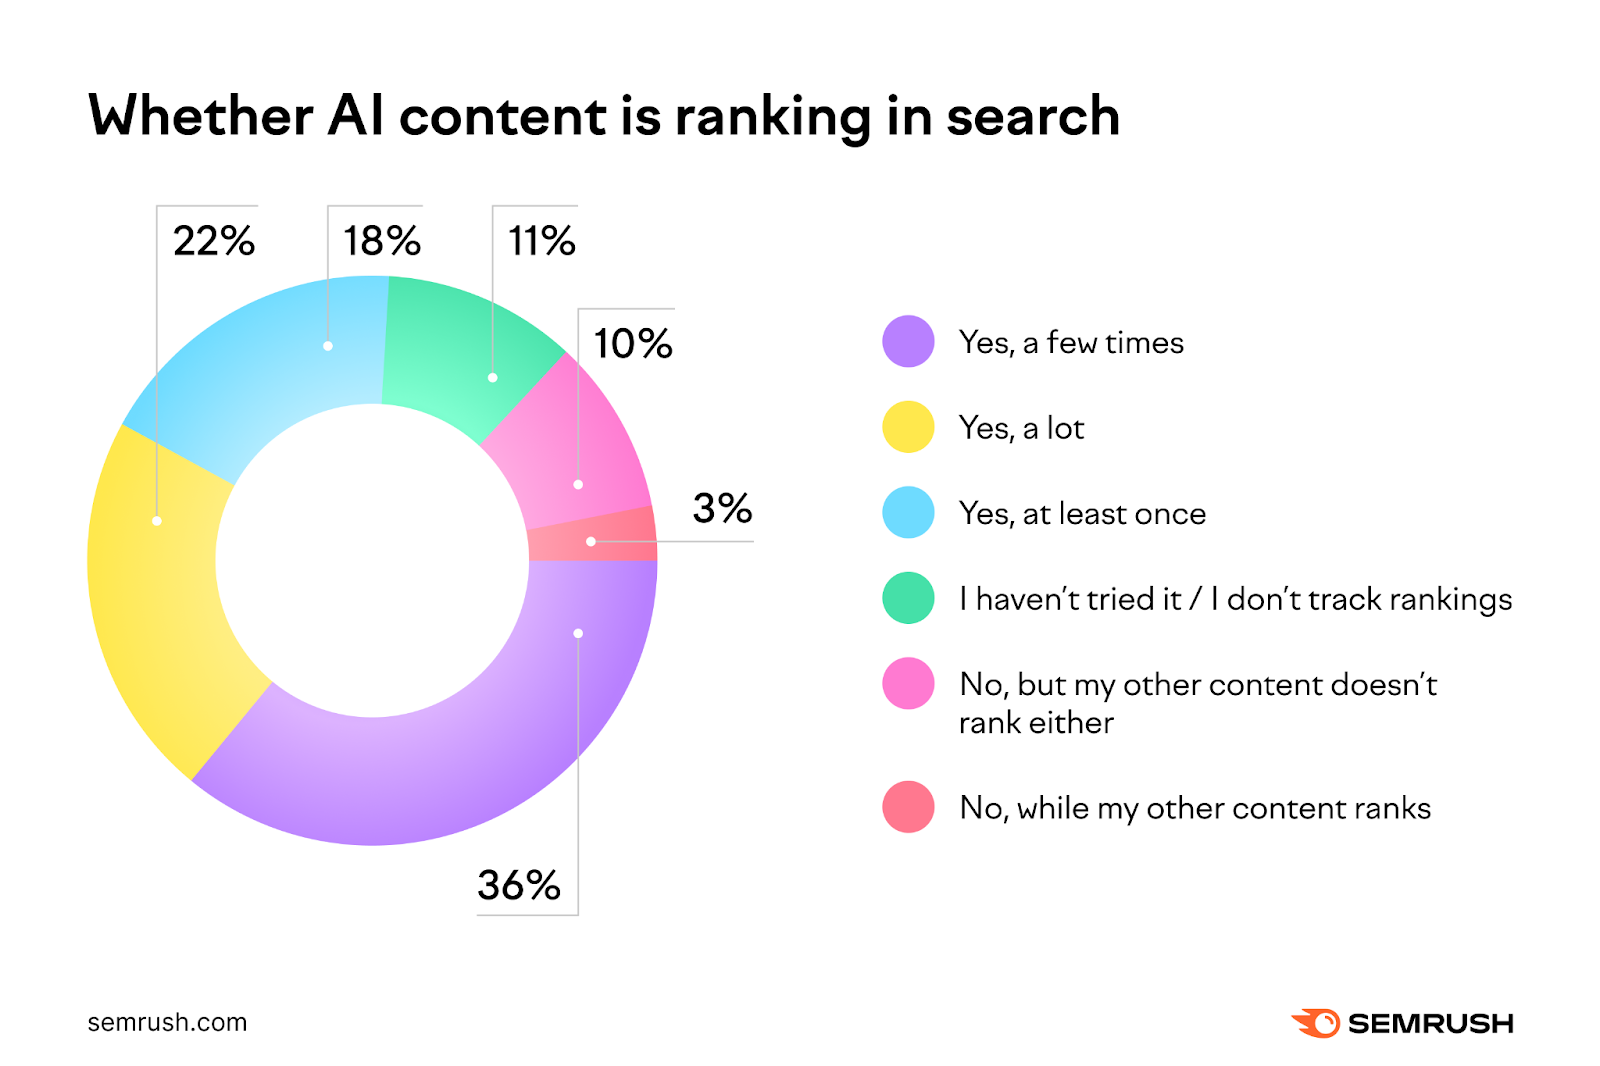  does AI contented  rank?